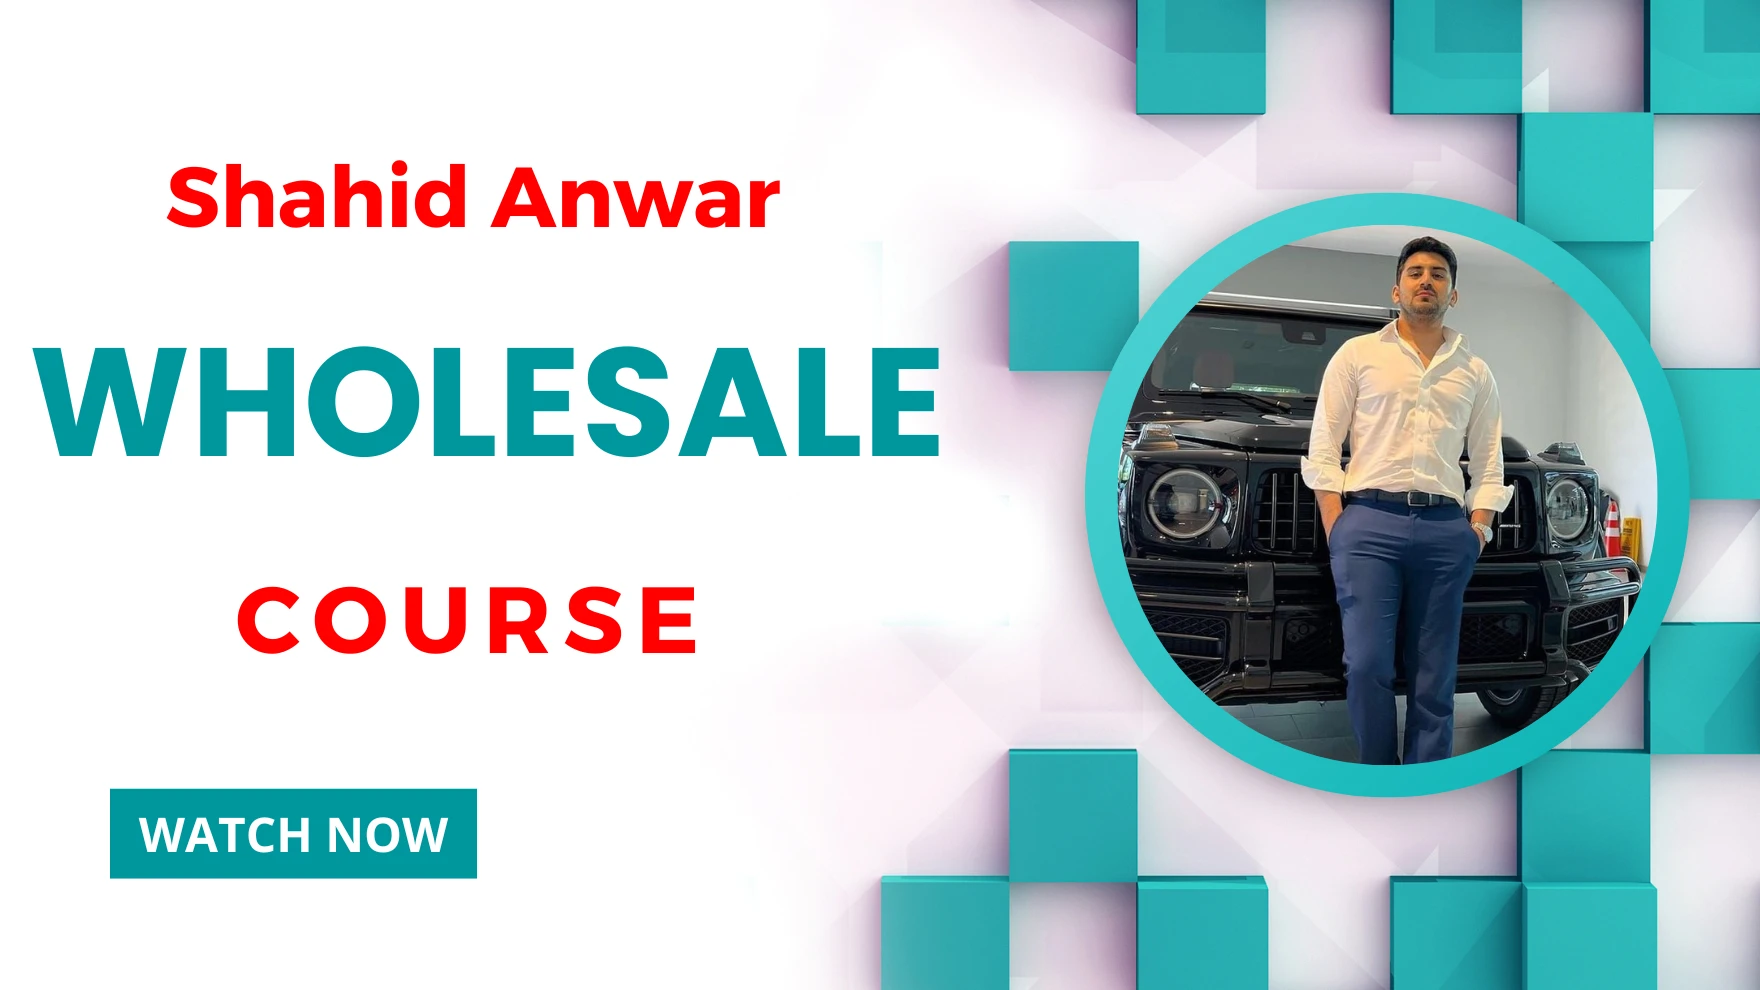 How To Contact Wholesale Suppliers Episode 7 - Shahid Anwar Free